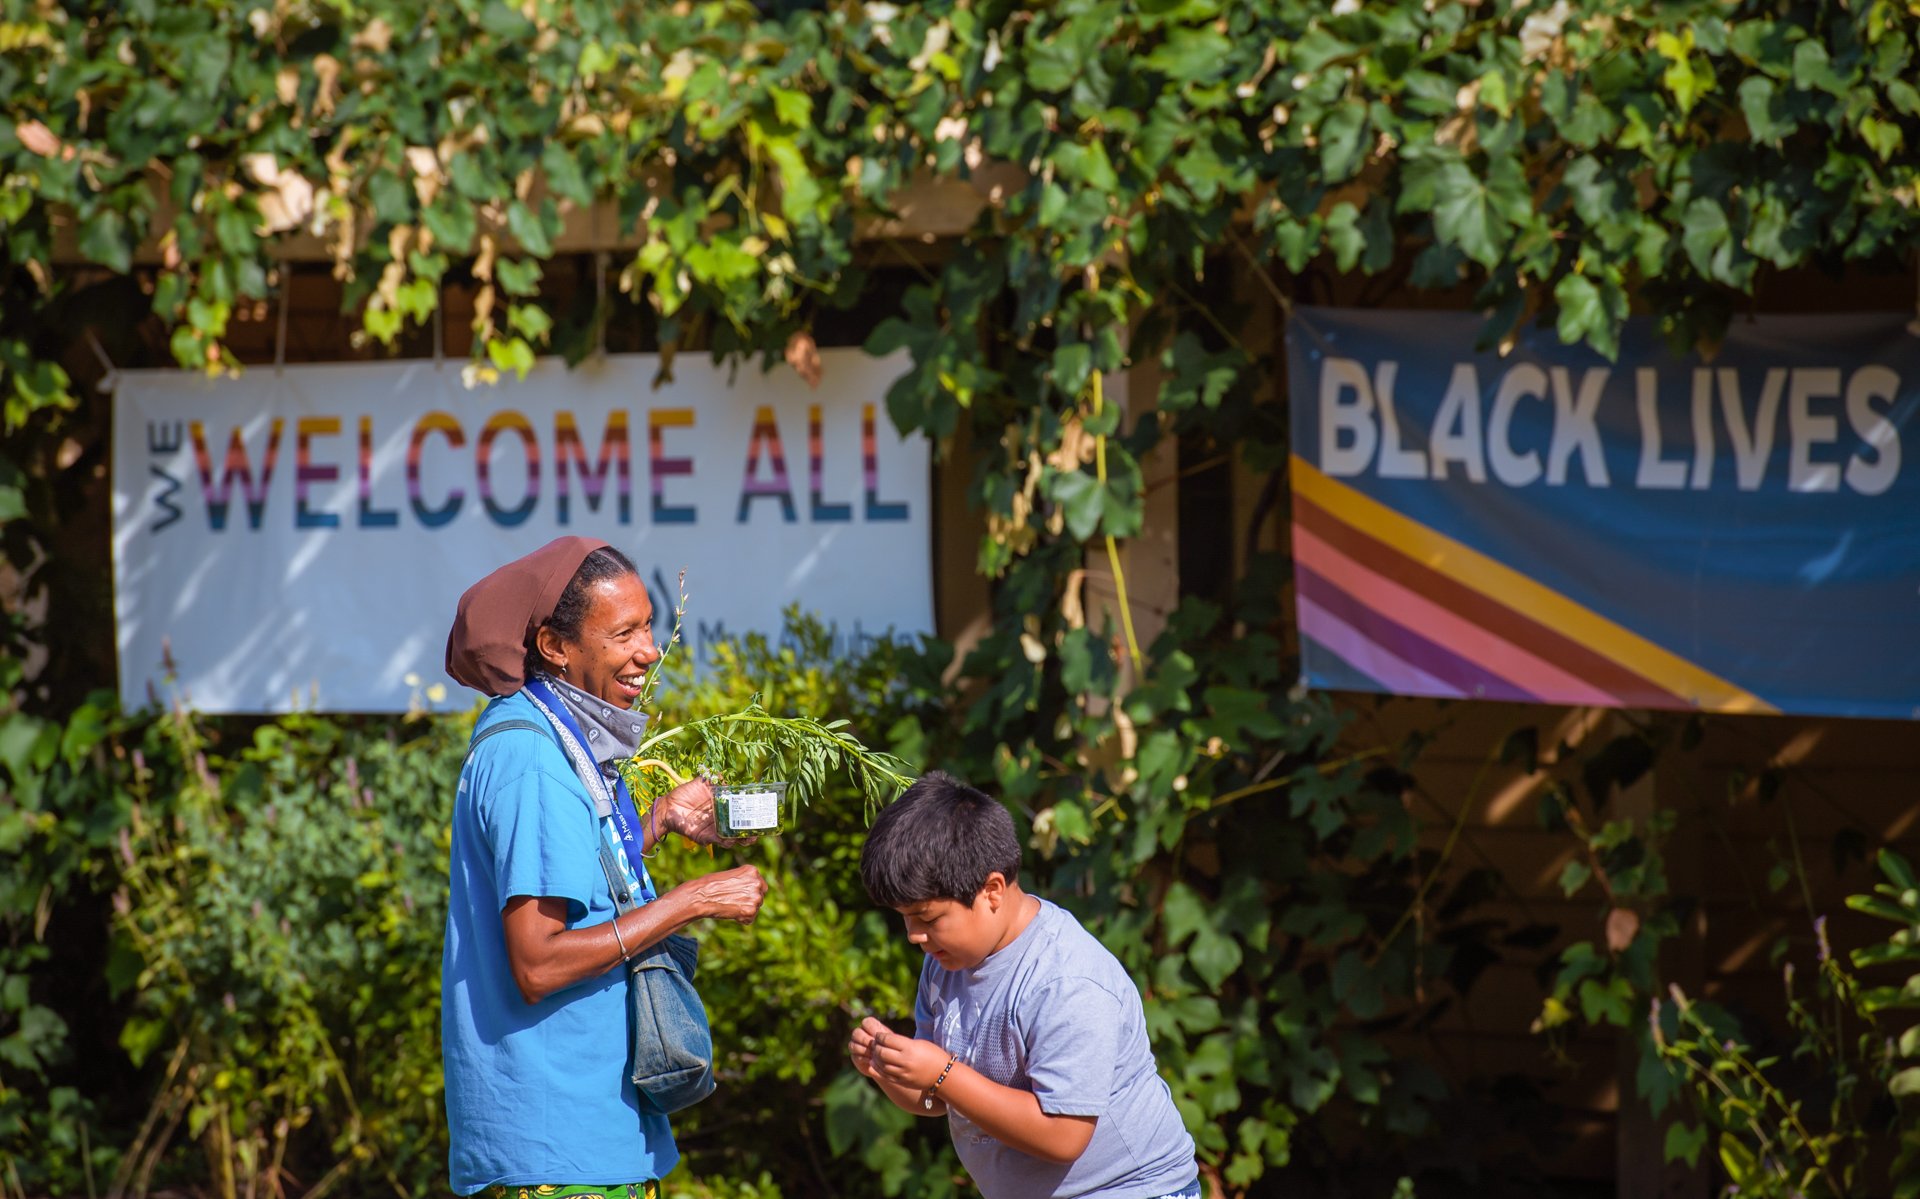 A teacher naturalist and a camper at Boston Nature Center standing in front of two banner signs surrounded by green foliage; one reads "We Welcome All" and the other reads "Black Lives Matter"